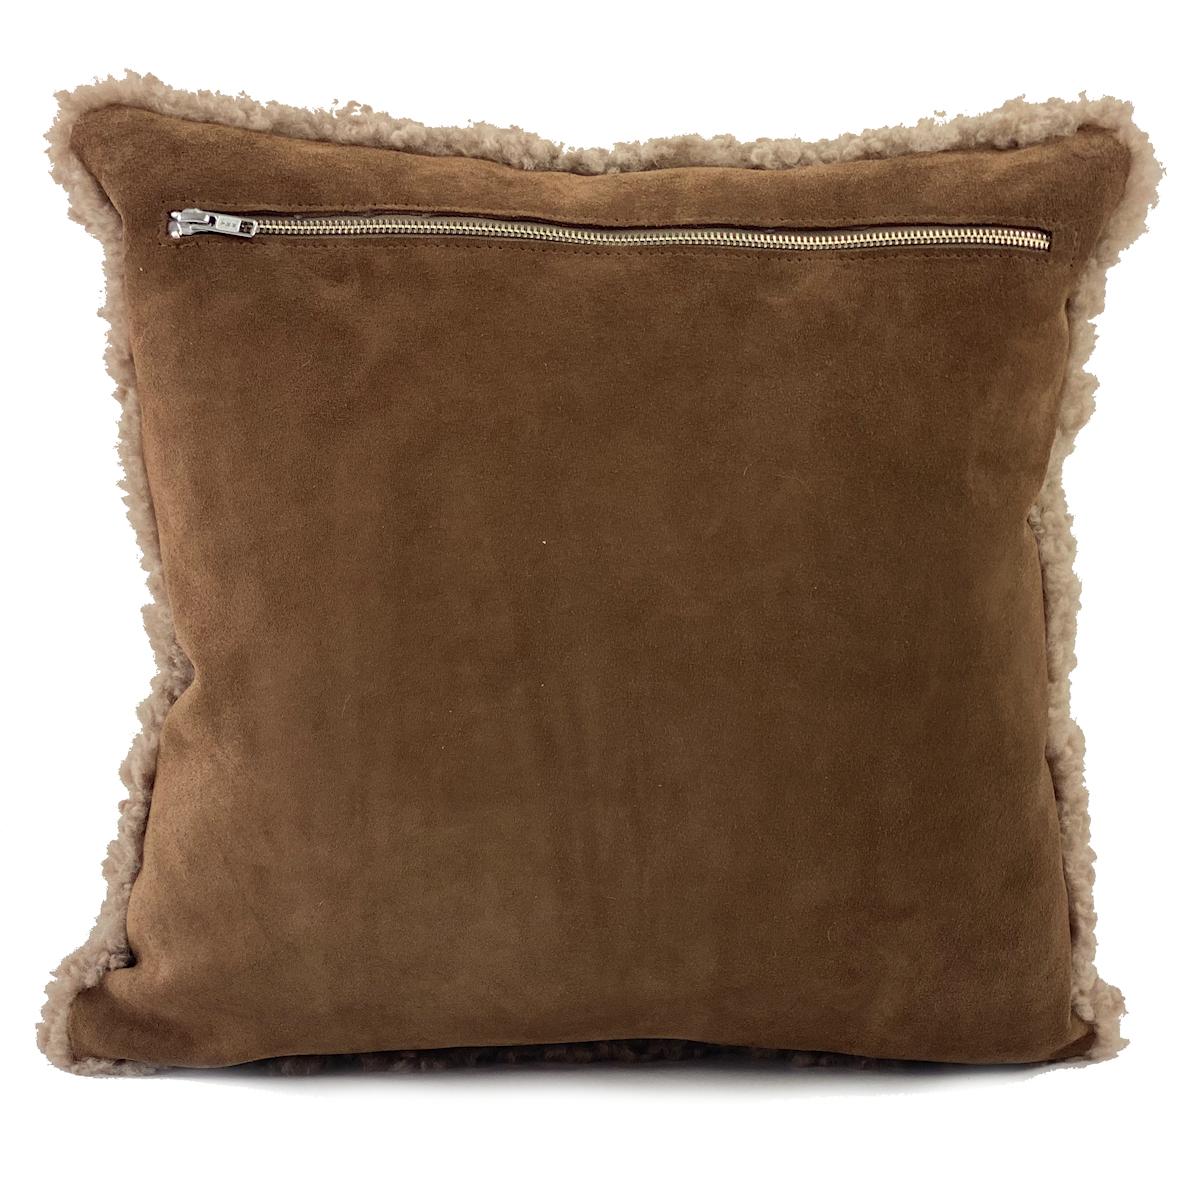 Elevate the charming textures in your decor with this large 50x50cm shearling sheepskin pillow. The boucle style wool pile features a short curly wool that will bring natural simplicity to life. Translating contemporary design paralleled with